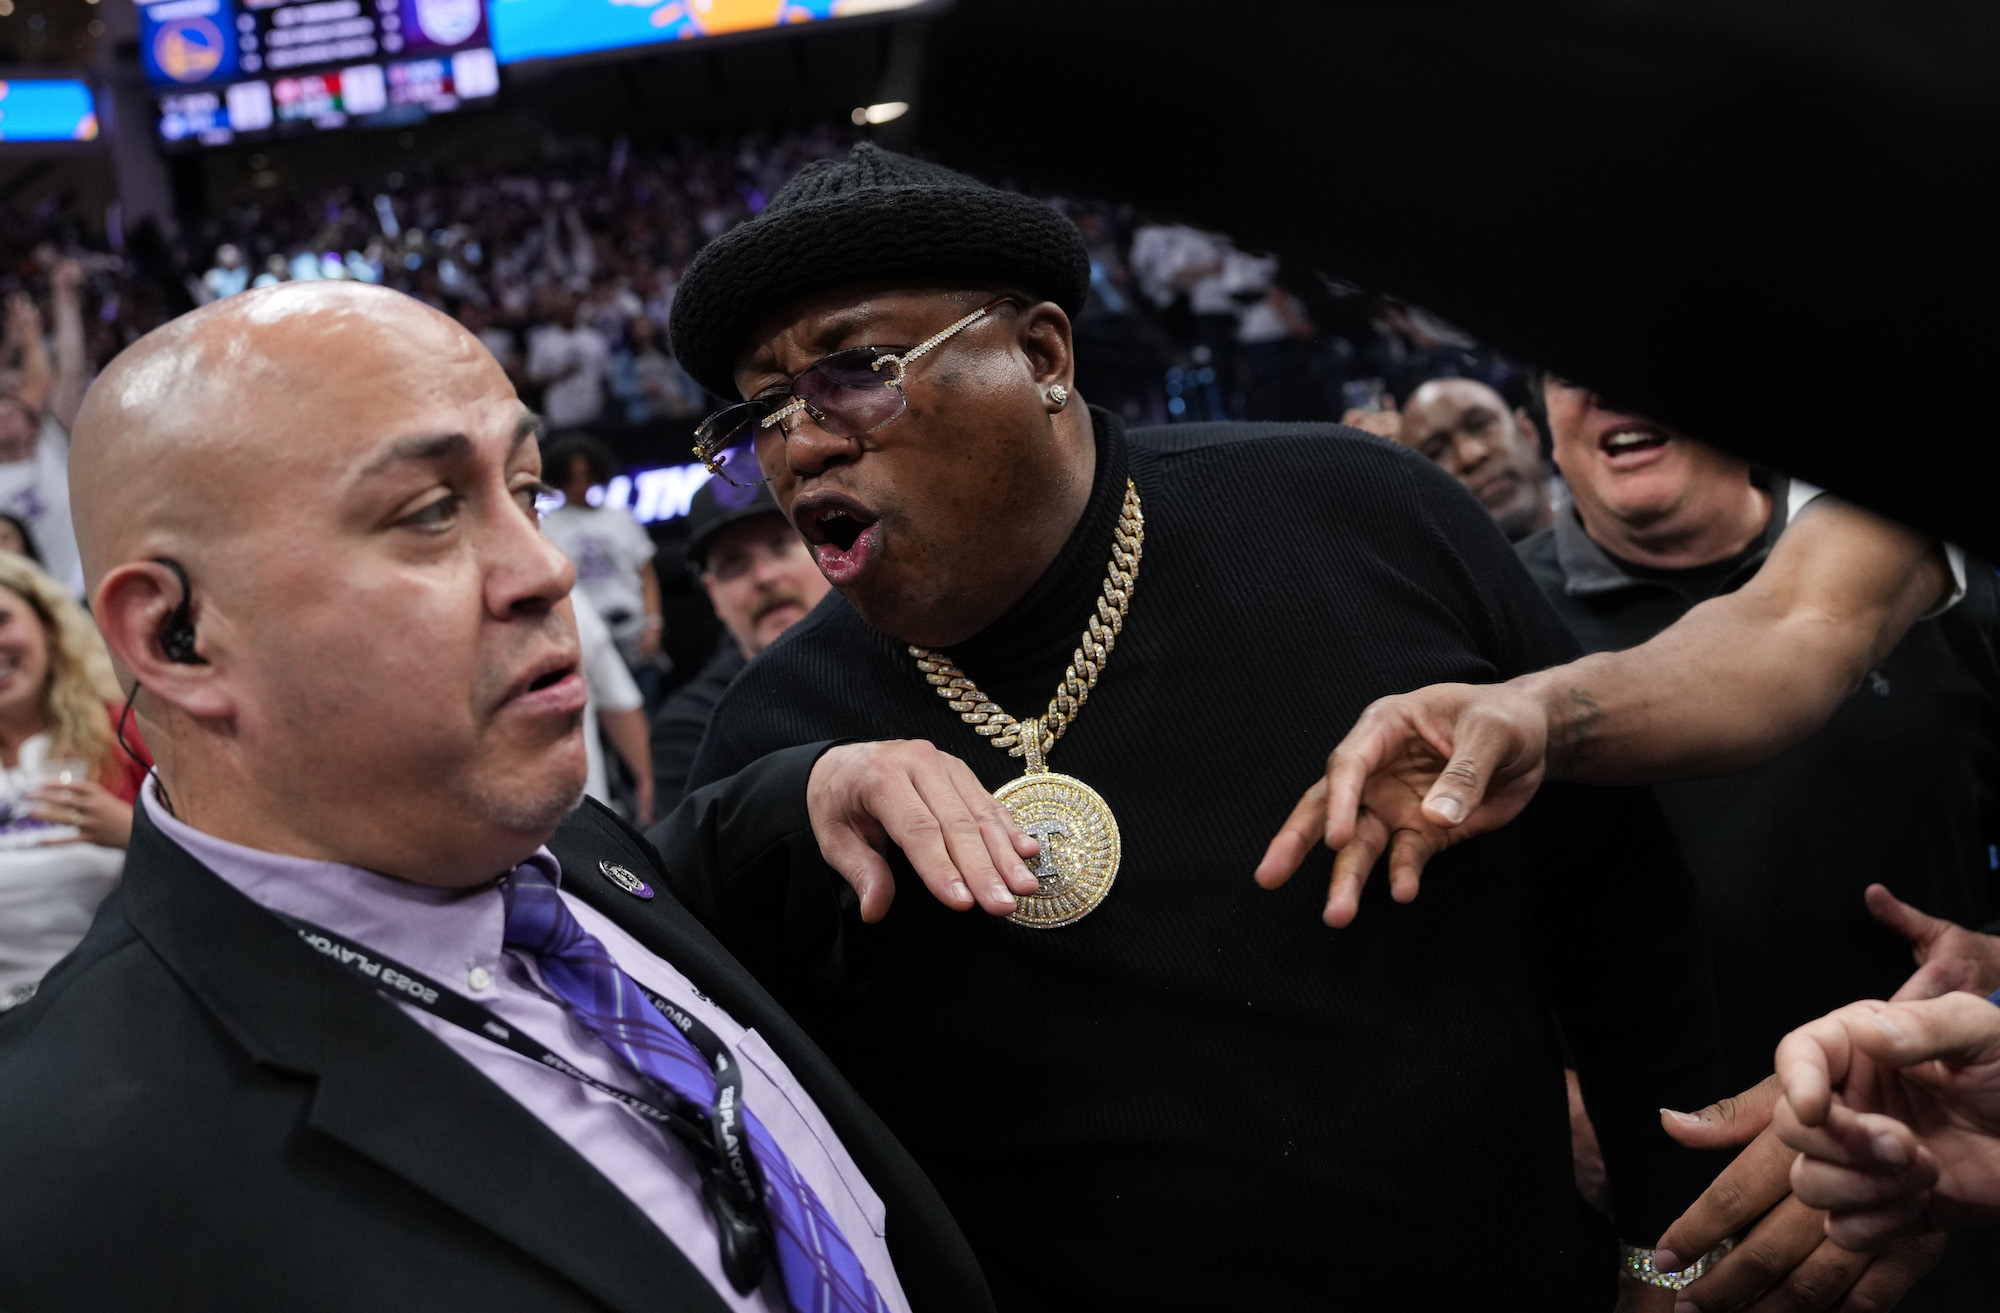 The rapper E-40 yells at arena security personnel before being escorted from courtside seating during Game One of the Western Conference First Round Playoffs between the Golden State Warriors and Sacramento Kings